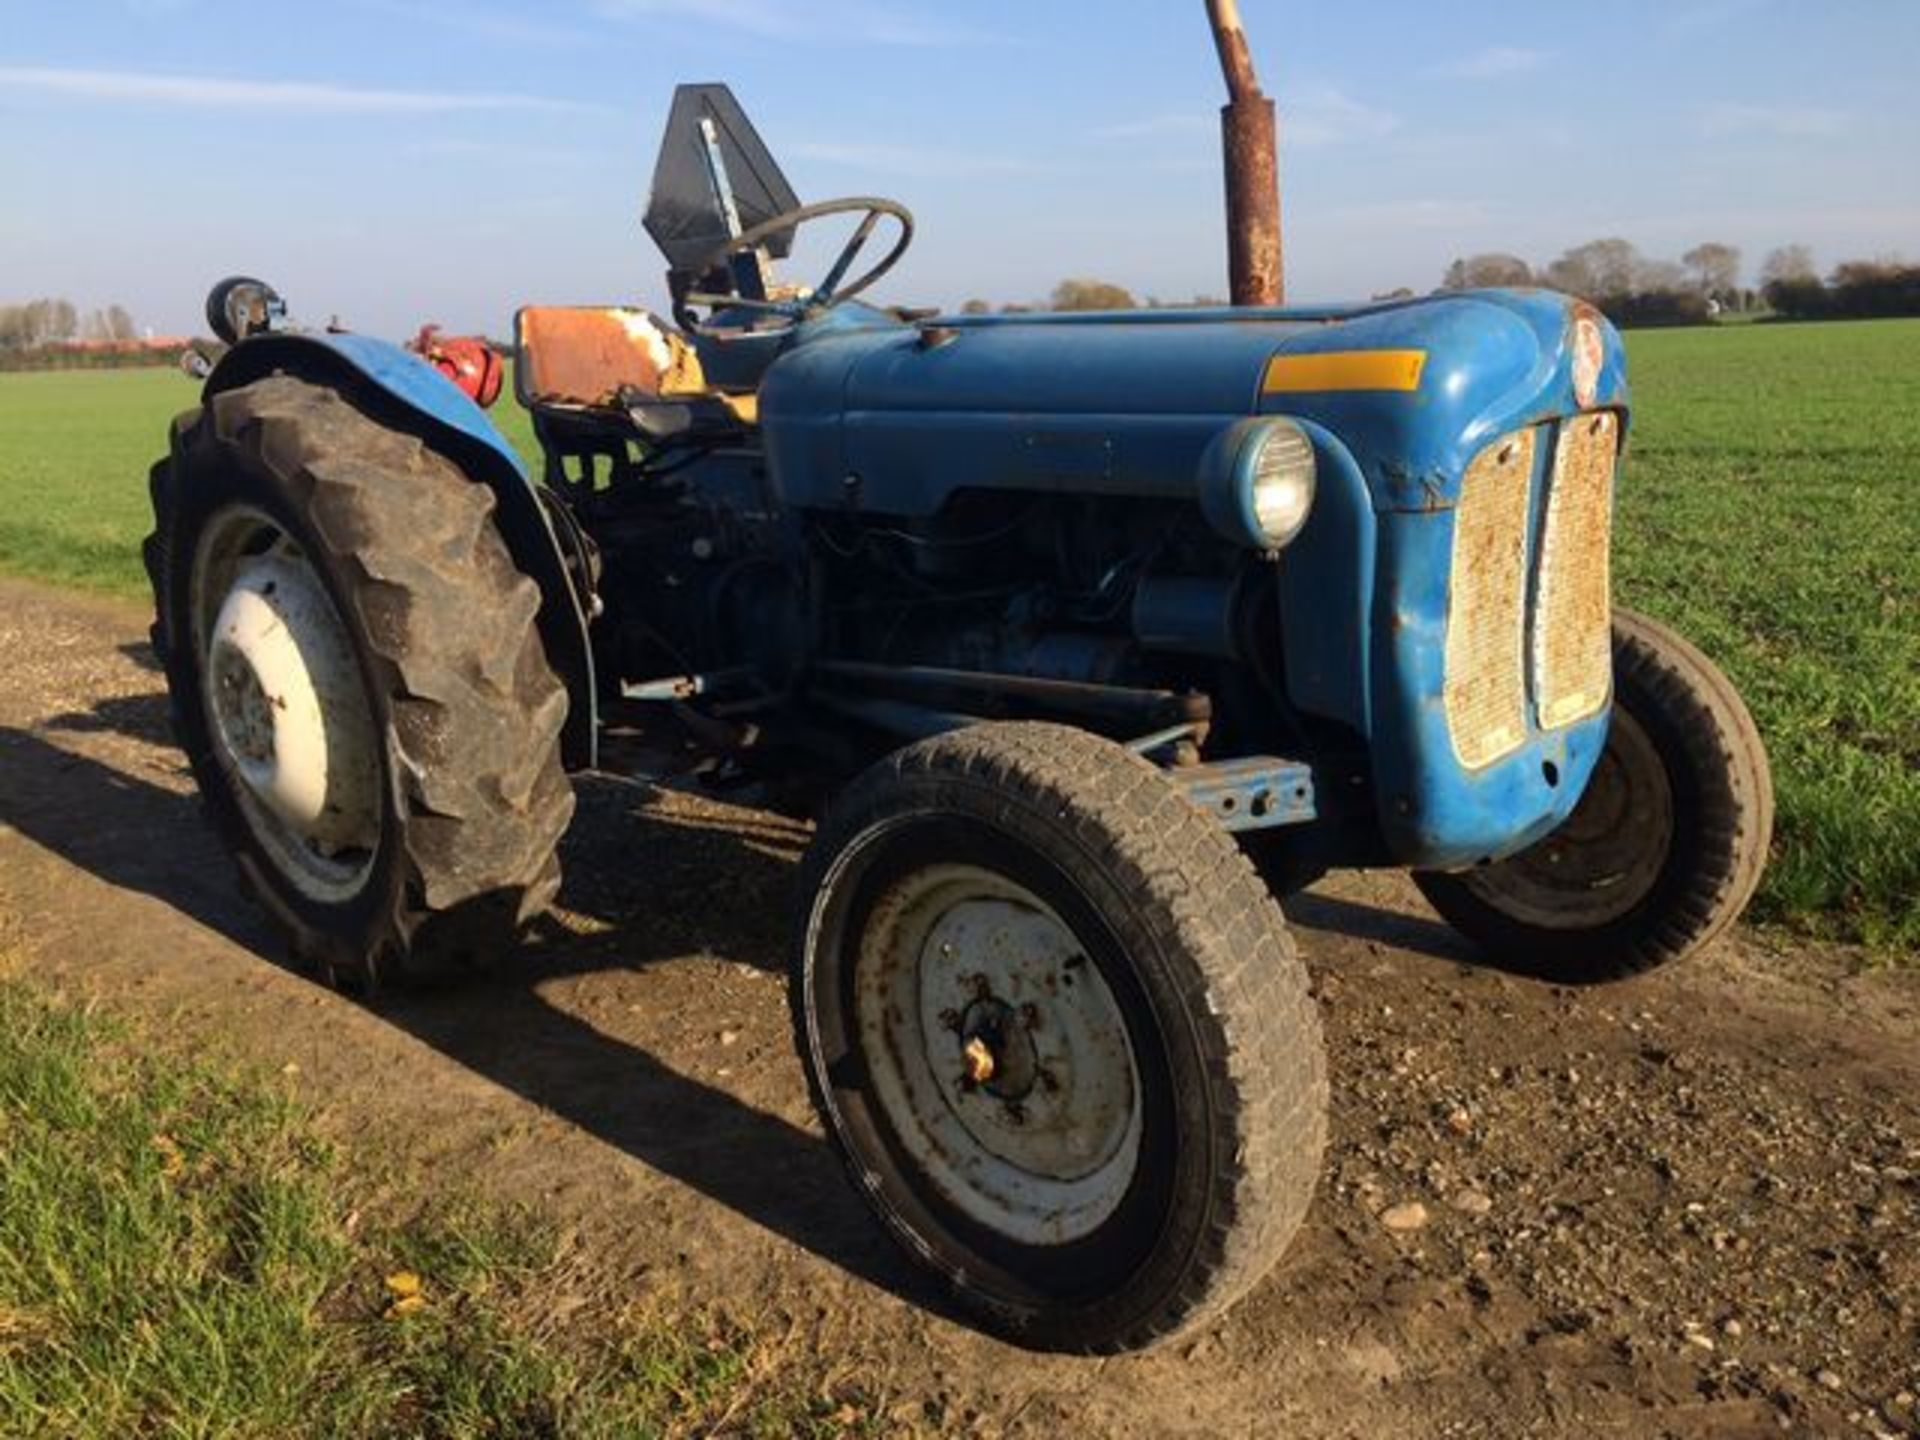 FORDSON Showing gearbox number 957E7003T4 we date this example to approximately 1961. Showing 6145